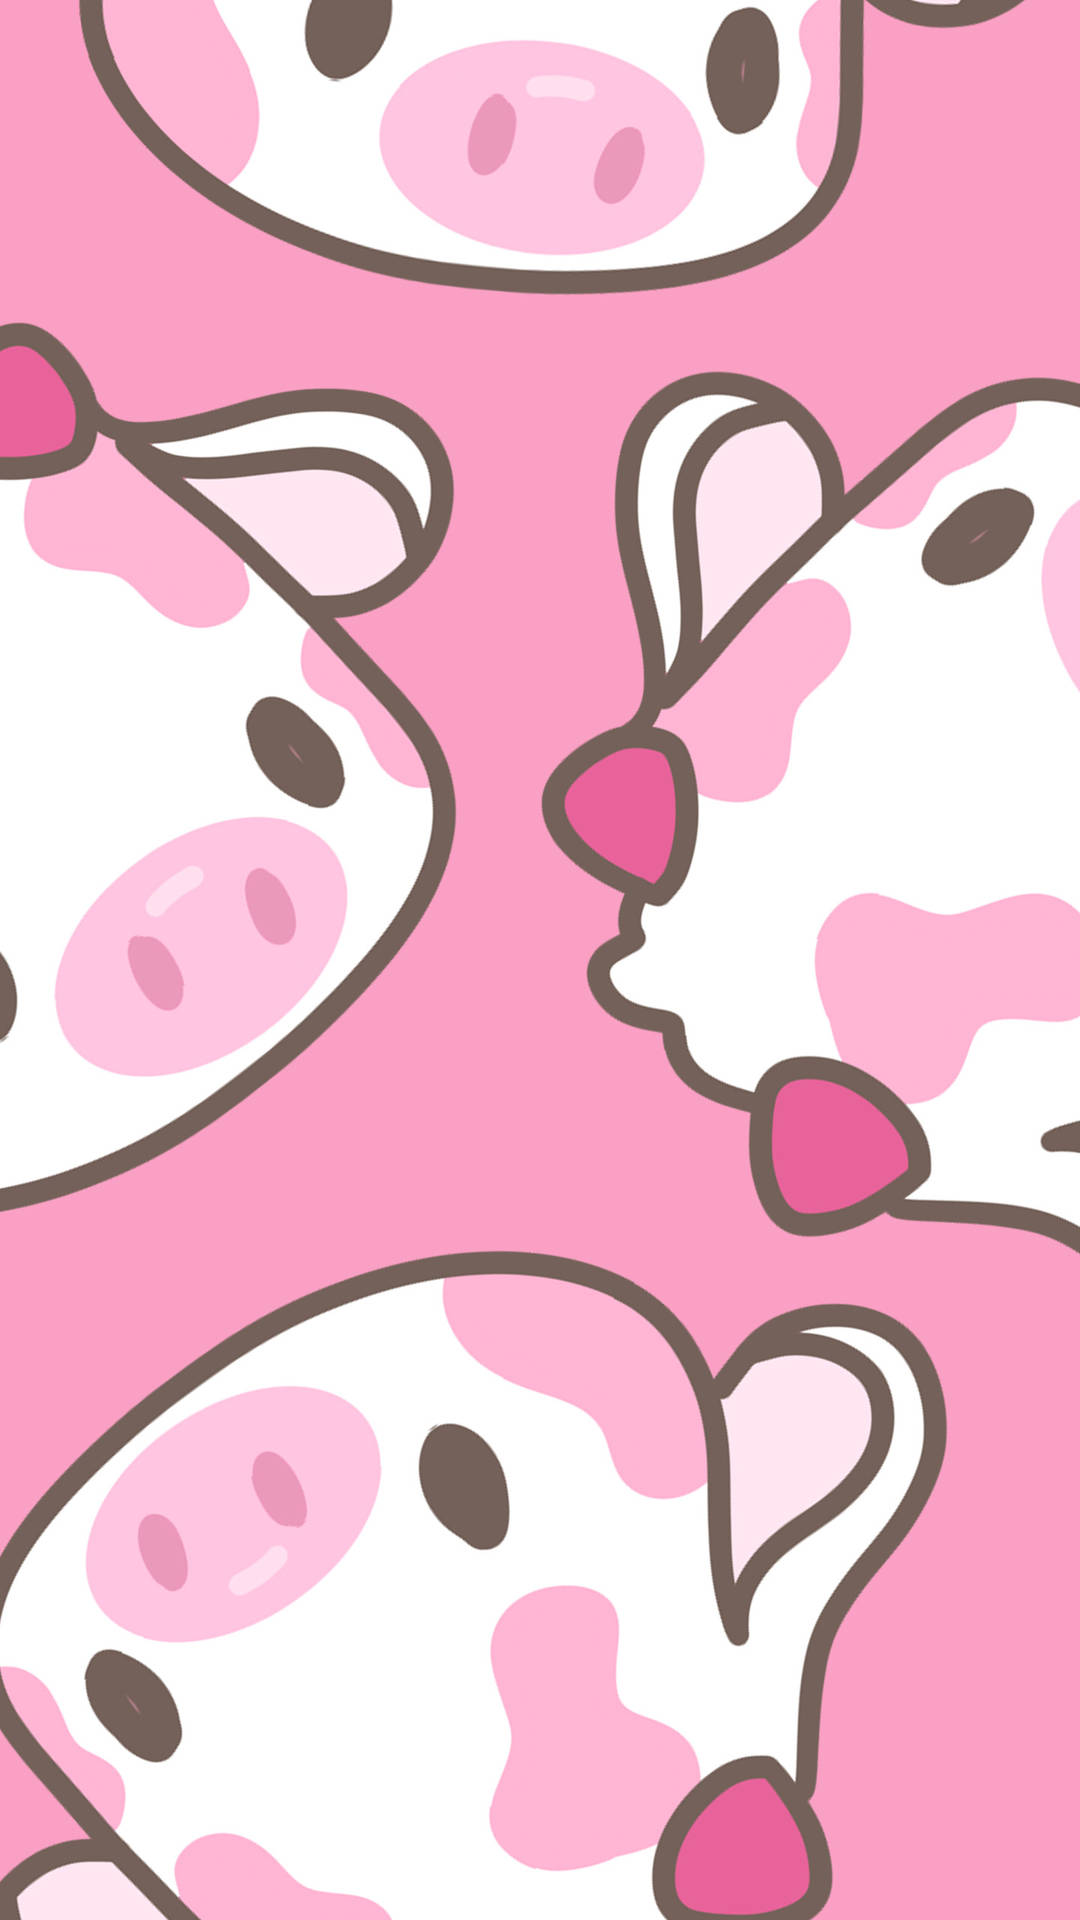 Strawberry Cute Cow by Maybk on Dribbble